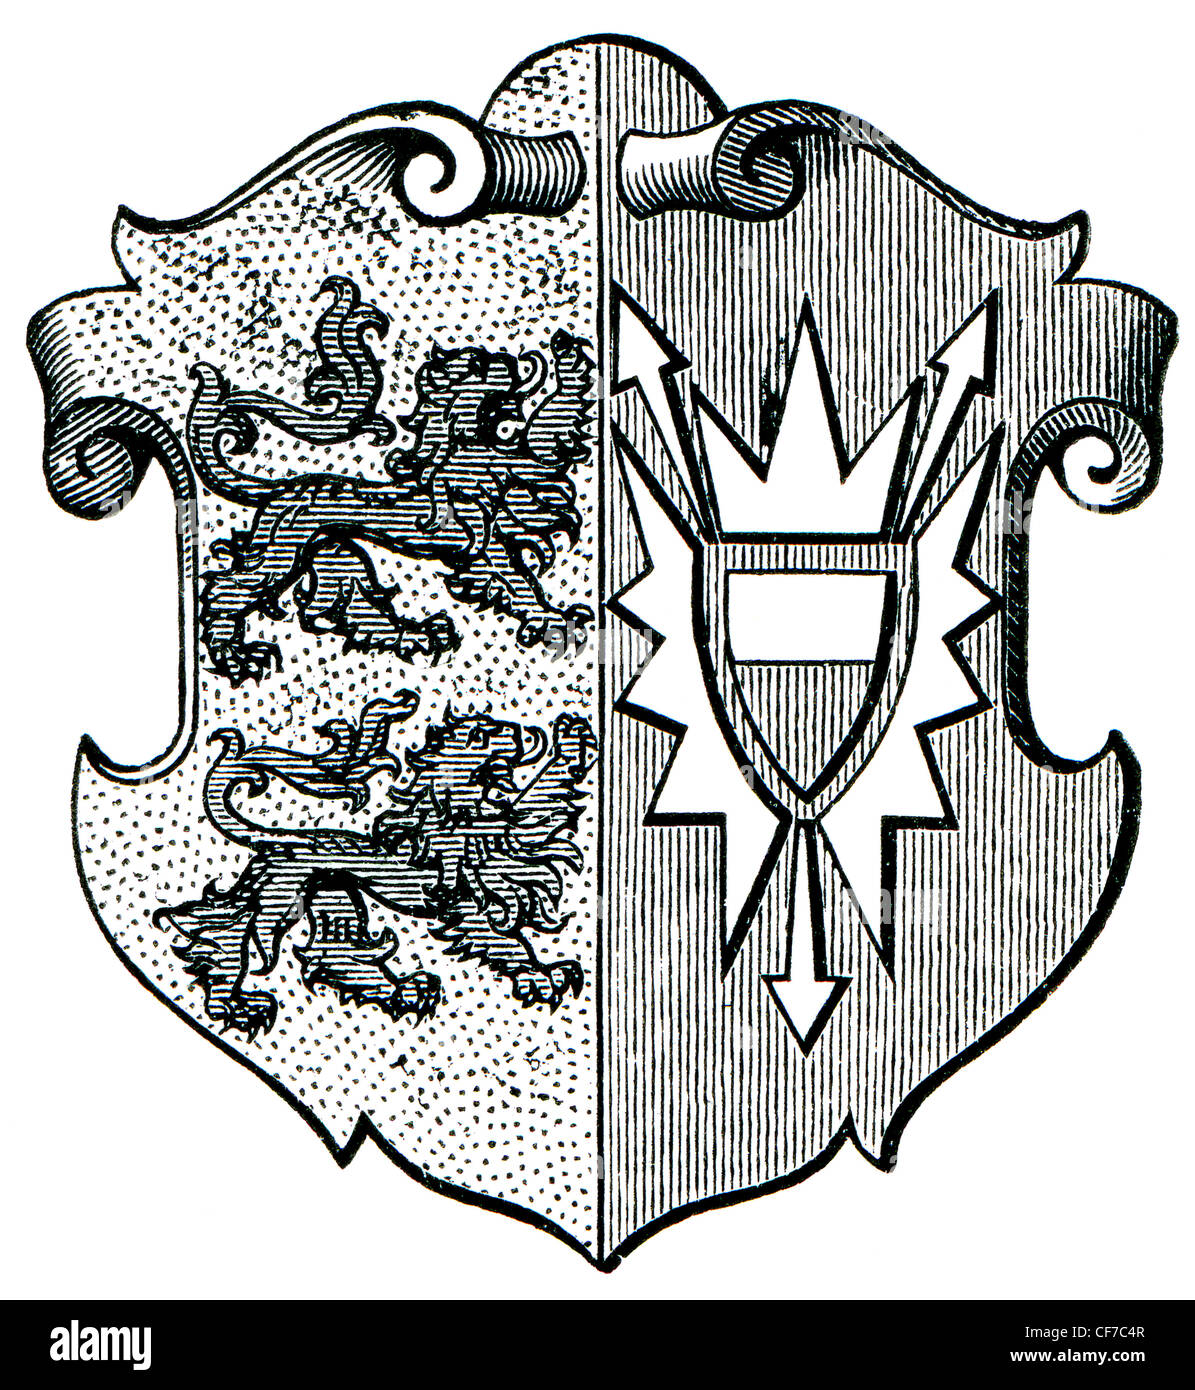 Coat of Arms Schleswig-Holstein Stock Photo